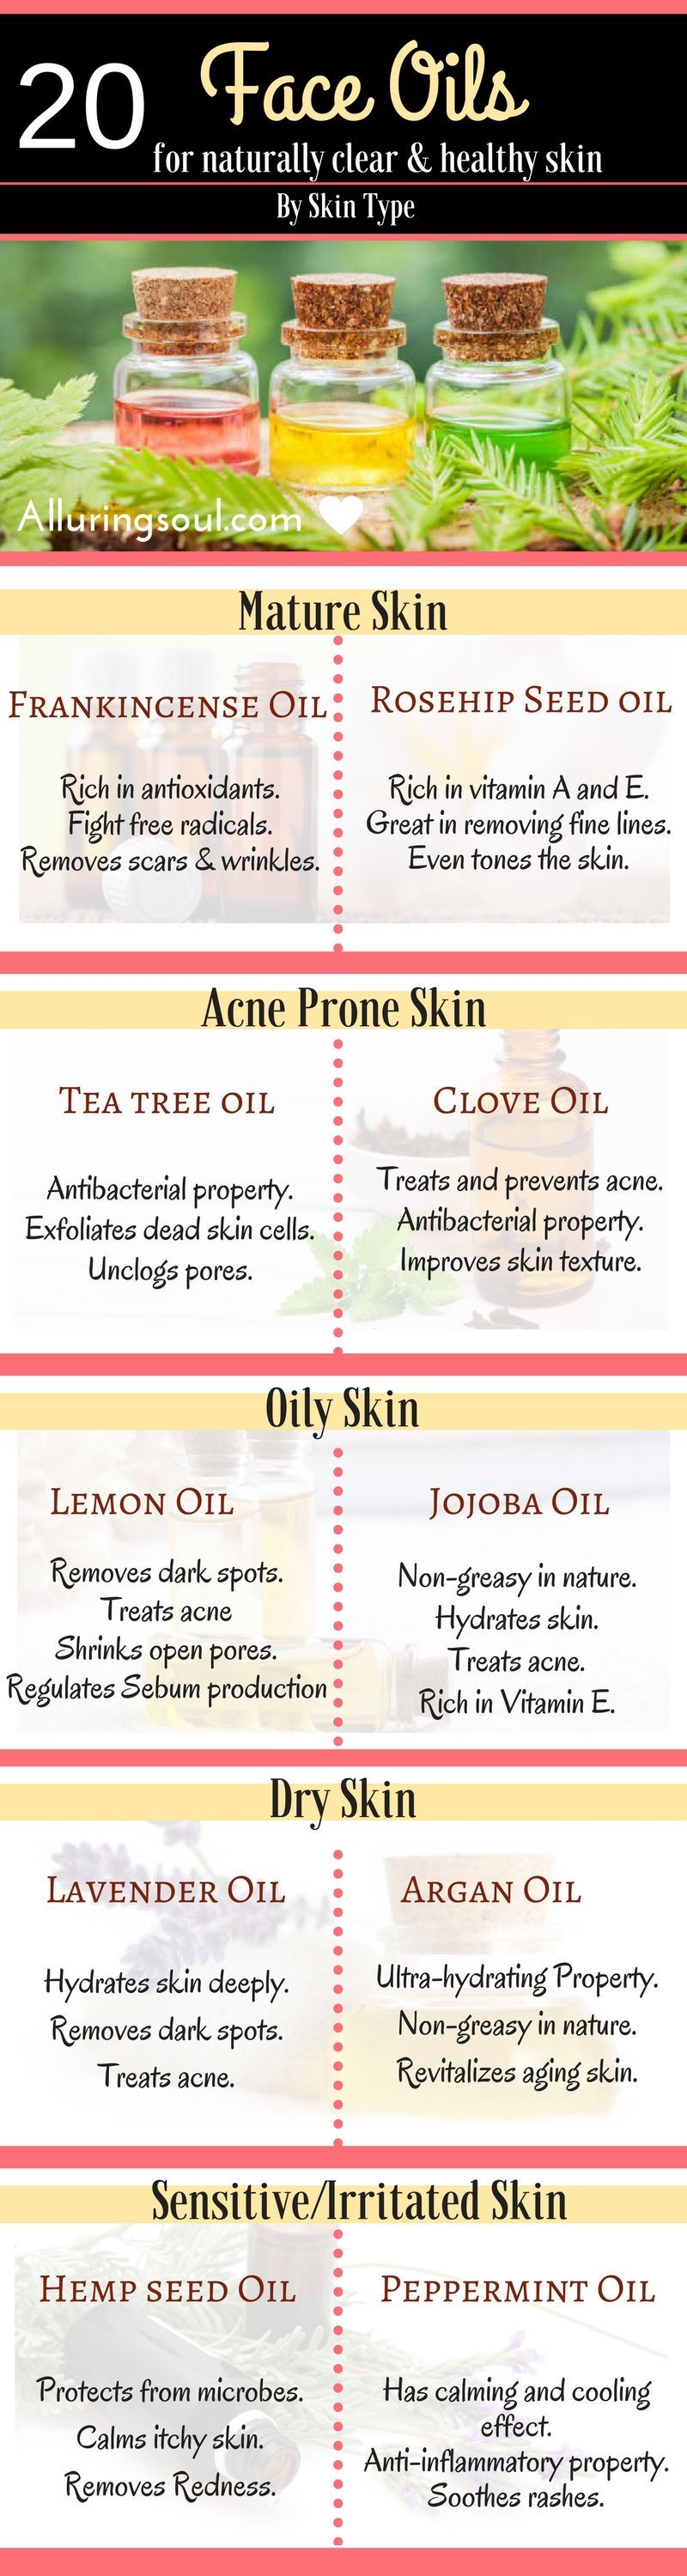 Face oils can do wonder on your skin. Whether you are suffering from acne or dry skin or oily skin or aging skin, face oil is the